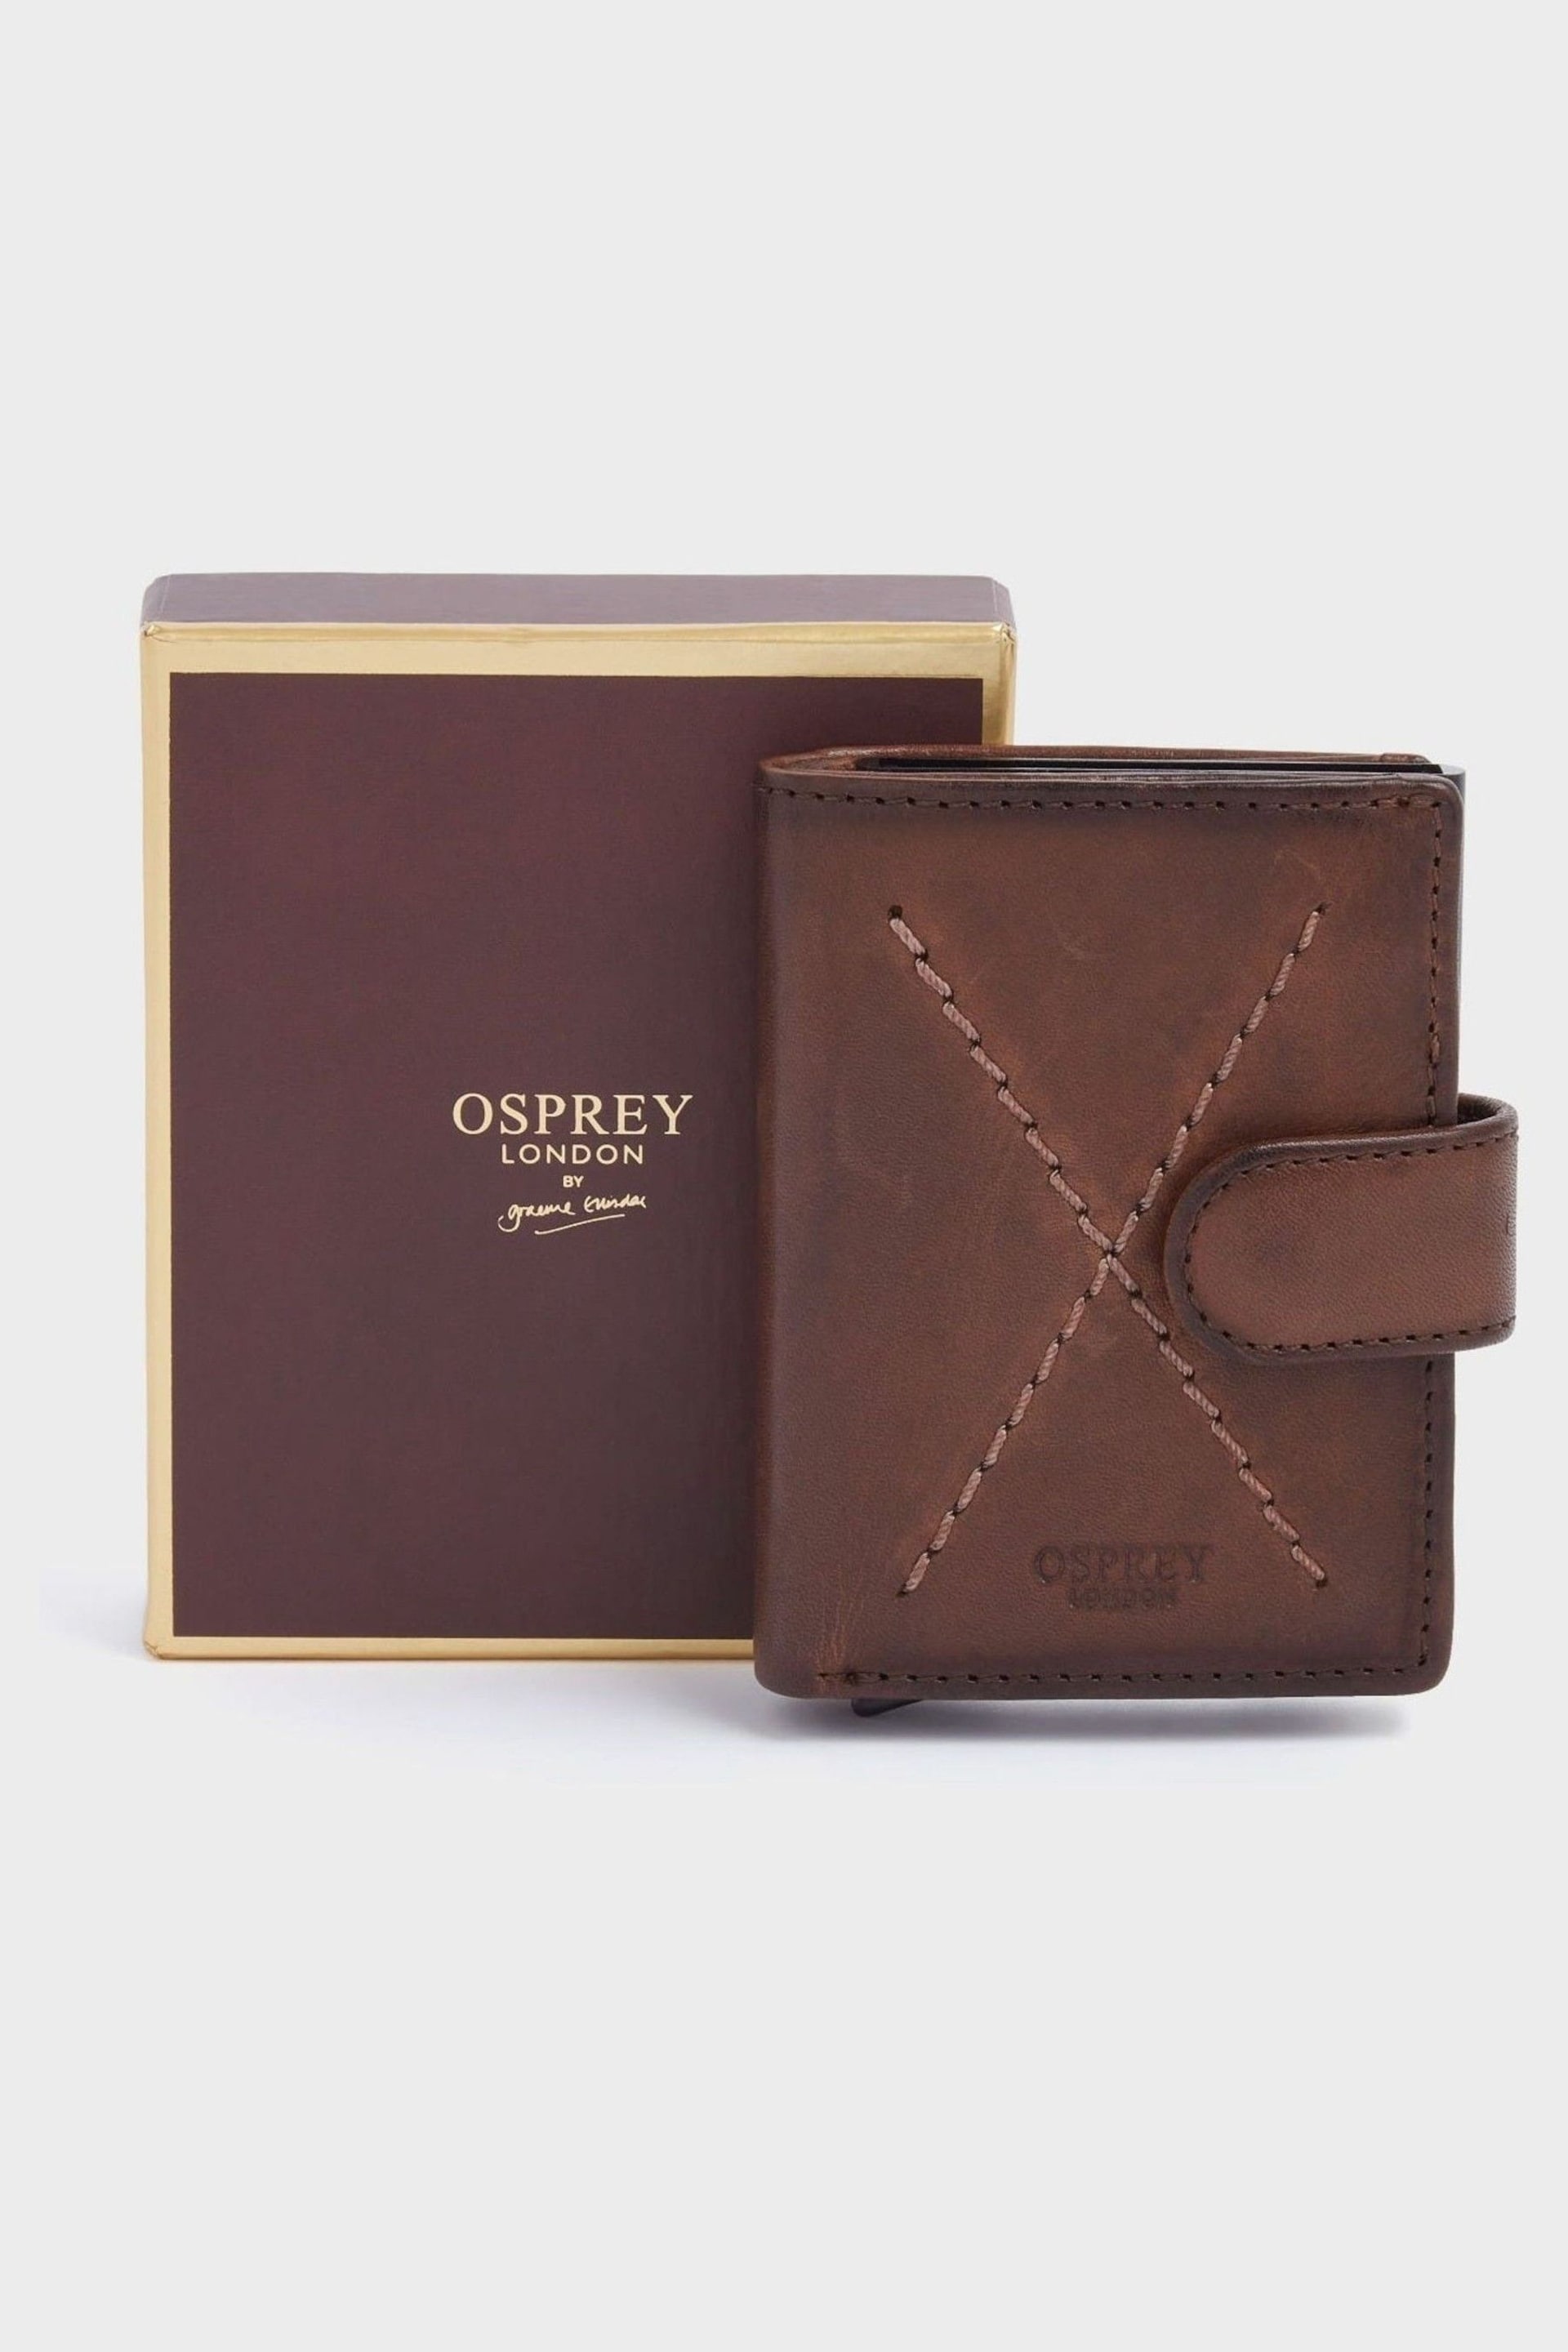 OSPREY LONDON The X Stitch Leather & Metal RFID ID Brown Card Case - Image 1 of 6